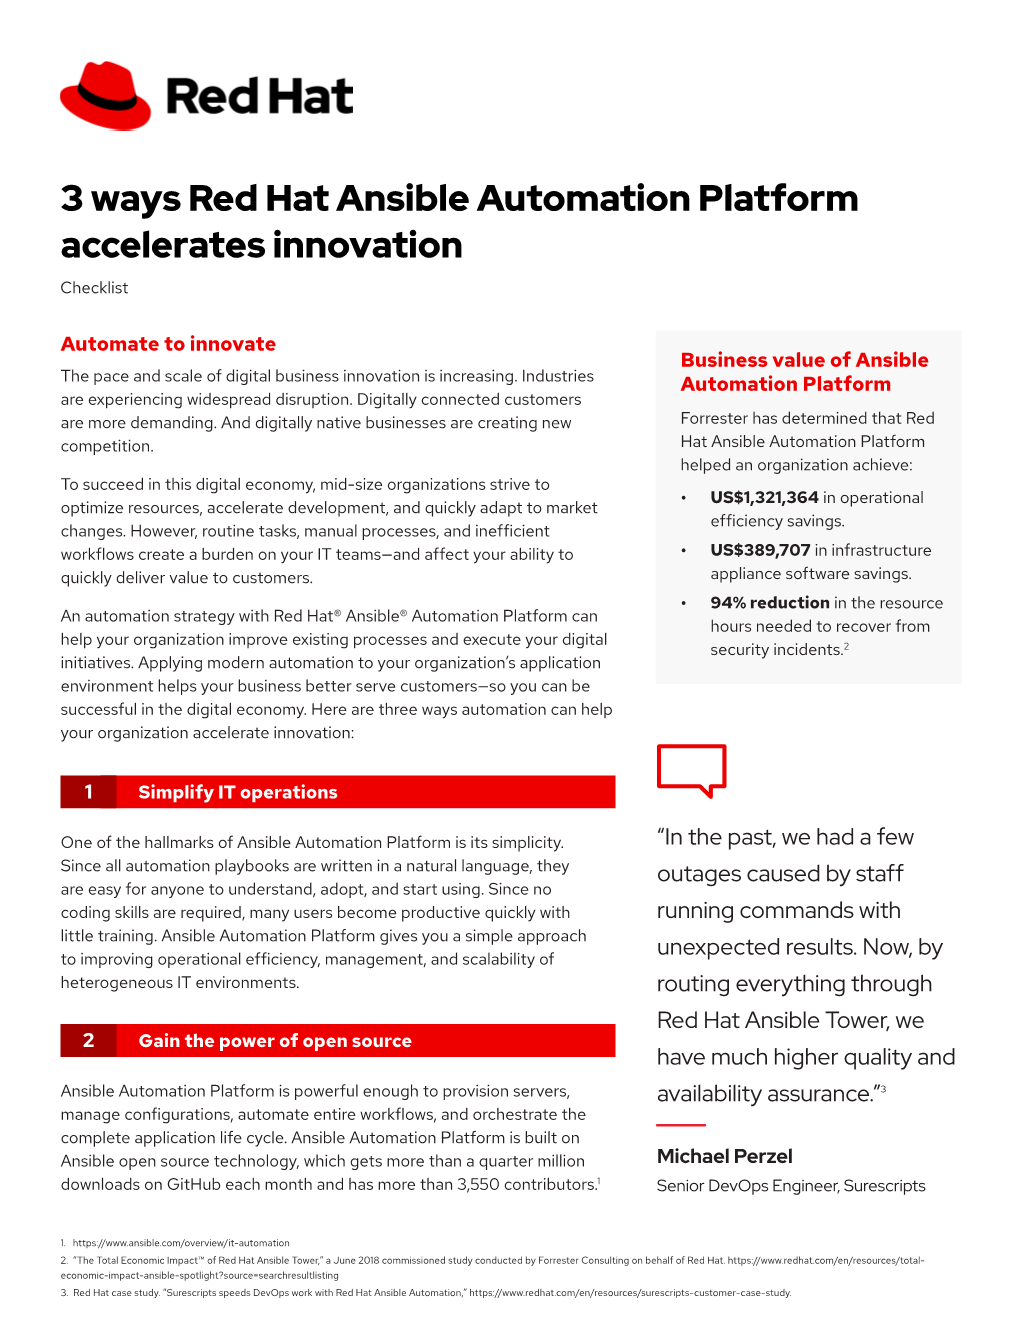 3 Ways Red Hat Ansible Automation Platform Accelerates Innovation Checklist